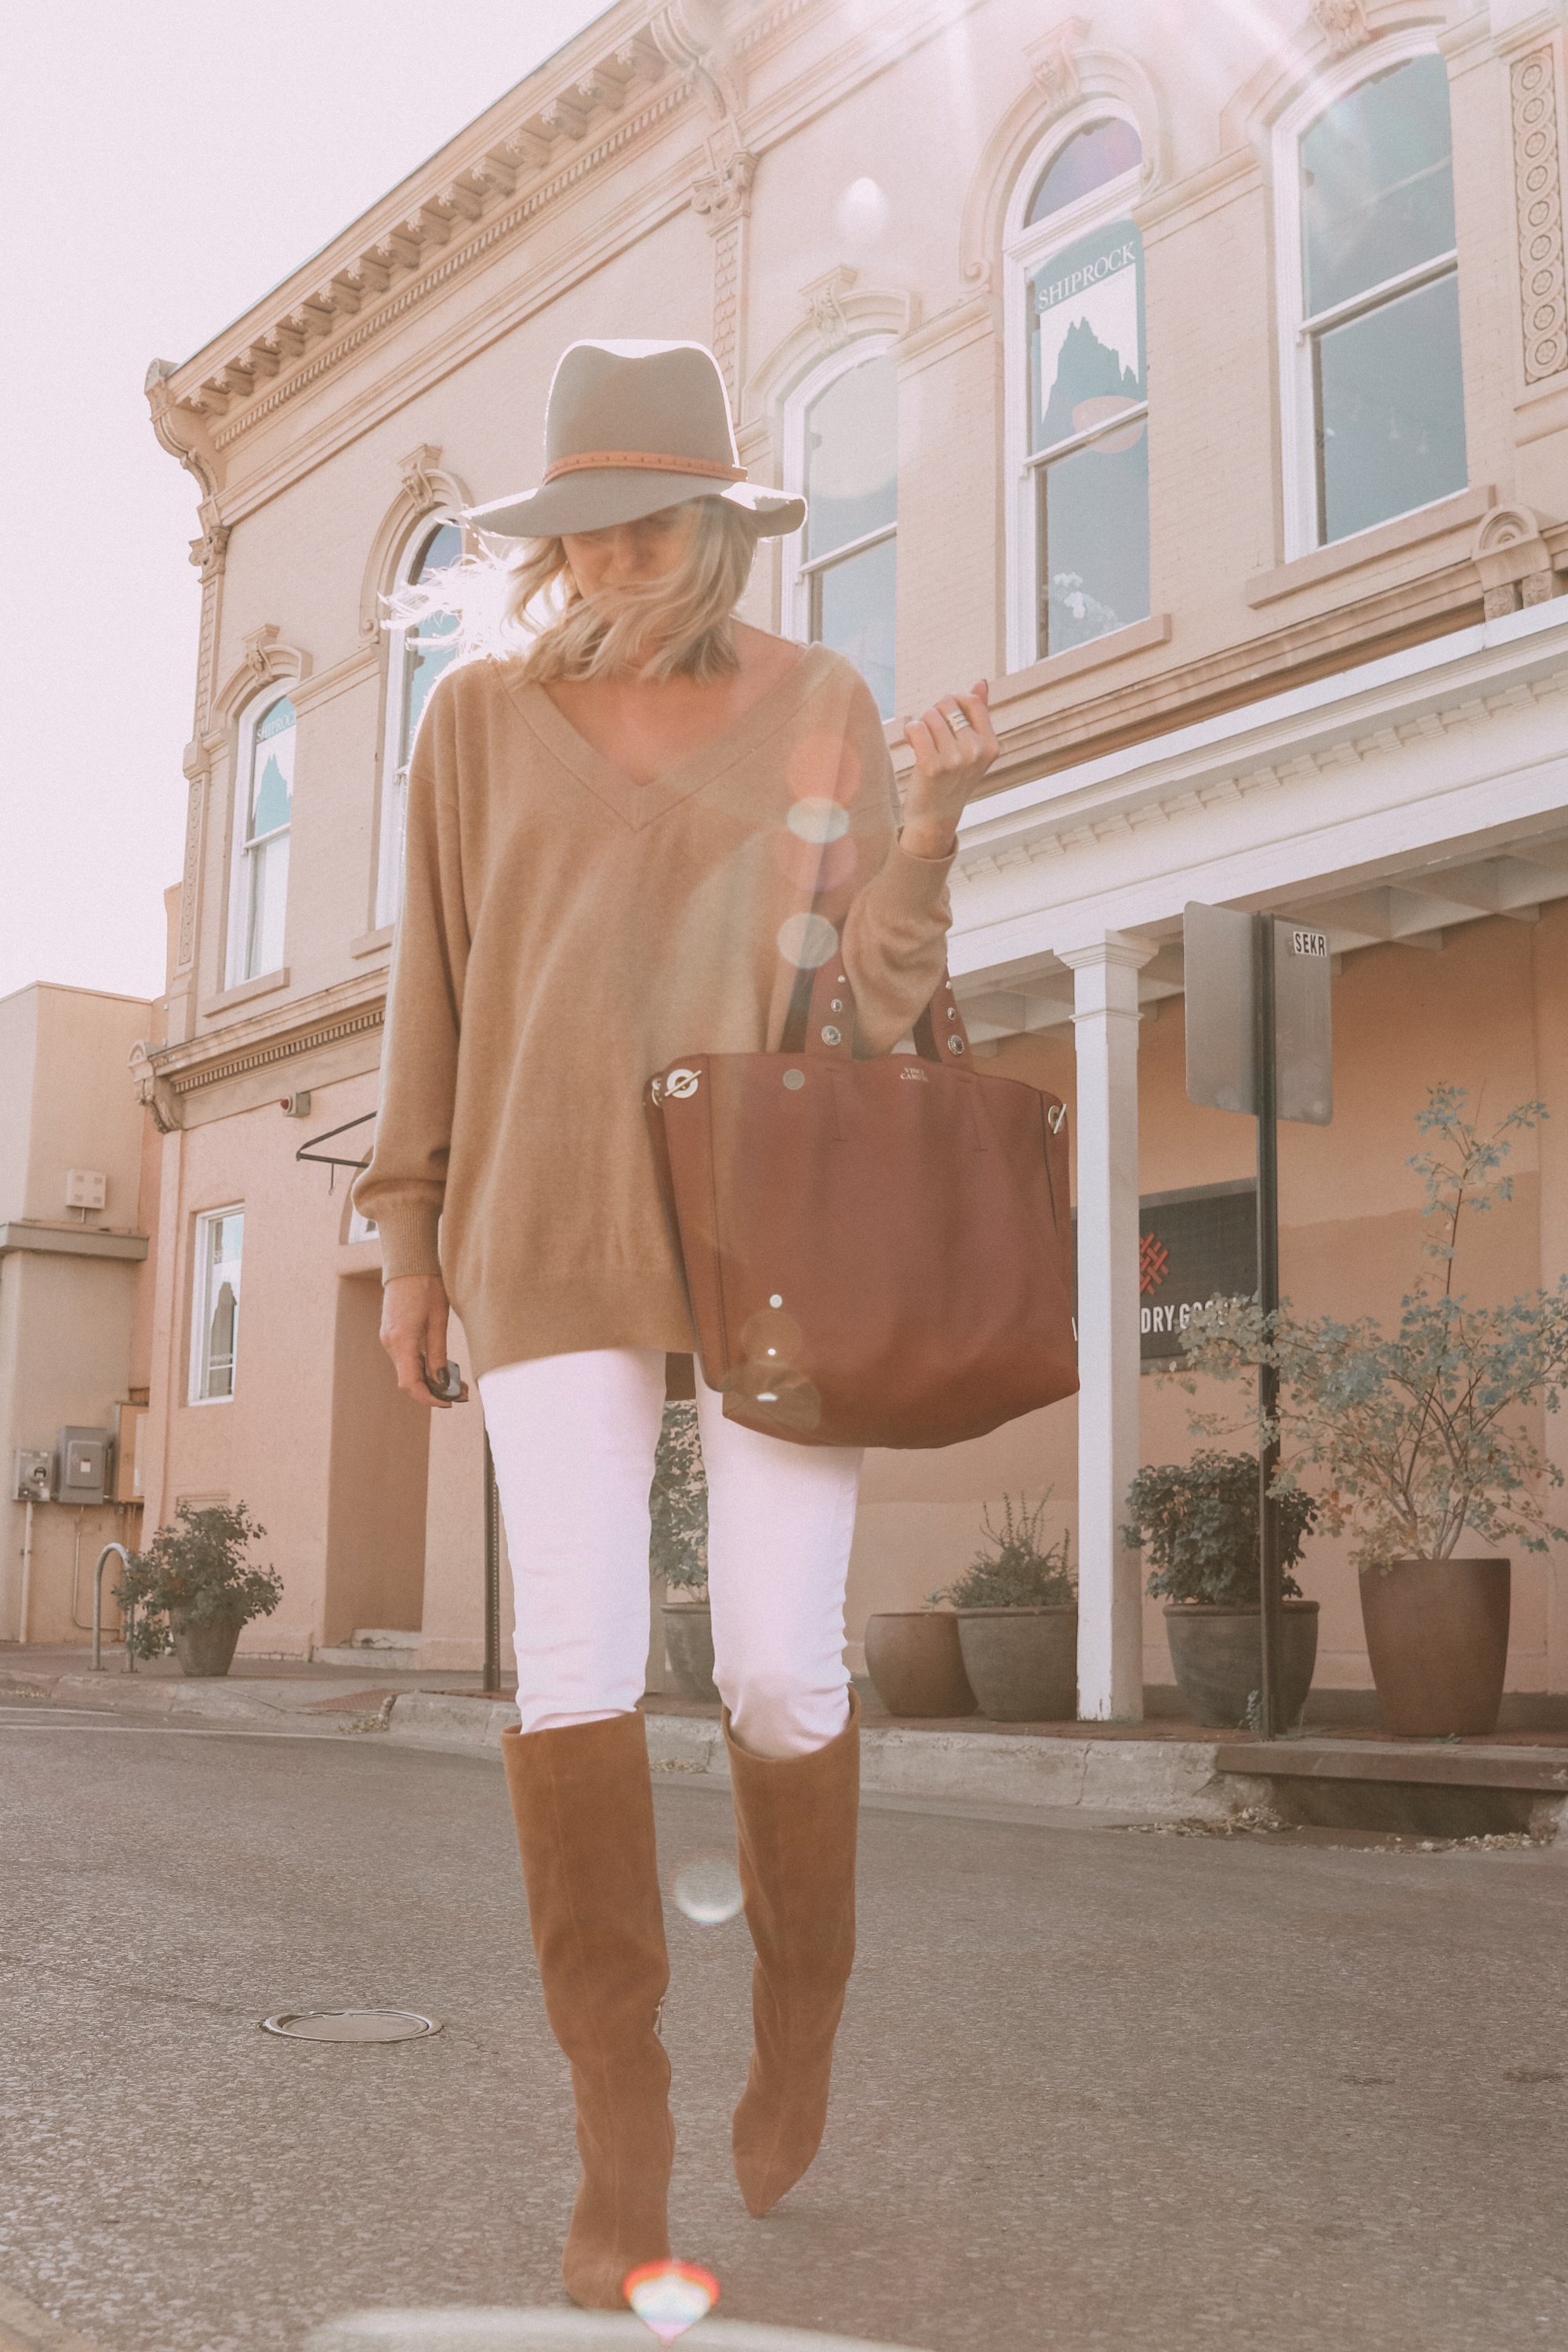 Brown Accessories For Fall, Fashion blogger Erin Busbee of BusbeeStyle.com wearing brown boots and brown tote from Vince Camuto with white jeans, camel sweater, leopard scarf, and Rag & bone hat in Santa Fe, New Mexico